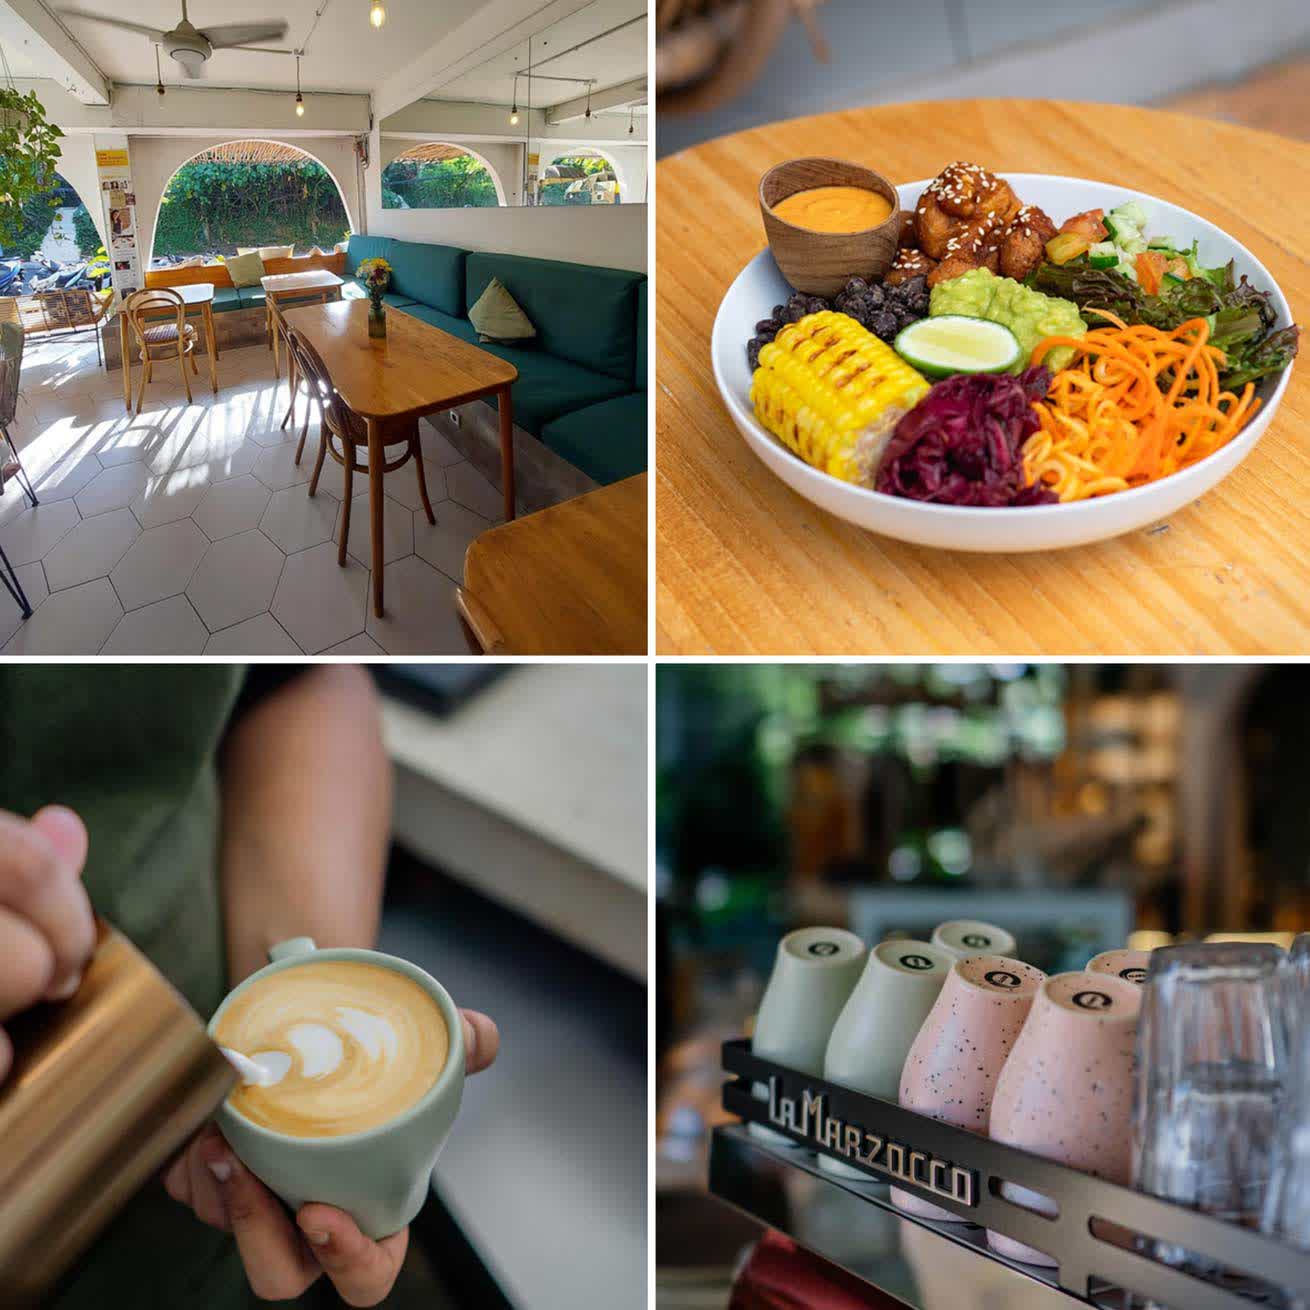 Tasty dishes, drinks and interior at Dharma café in Ubud